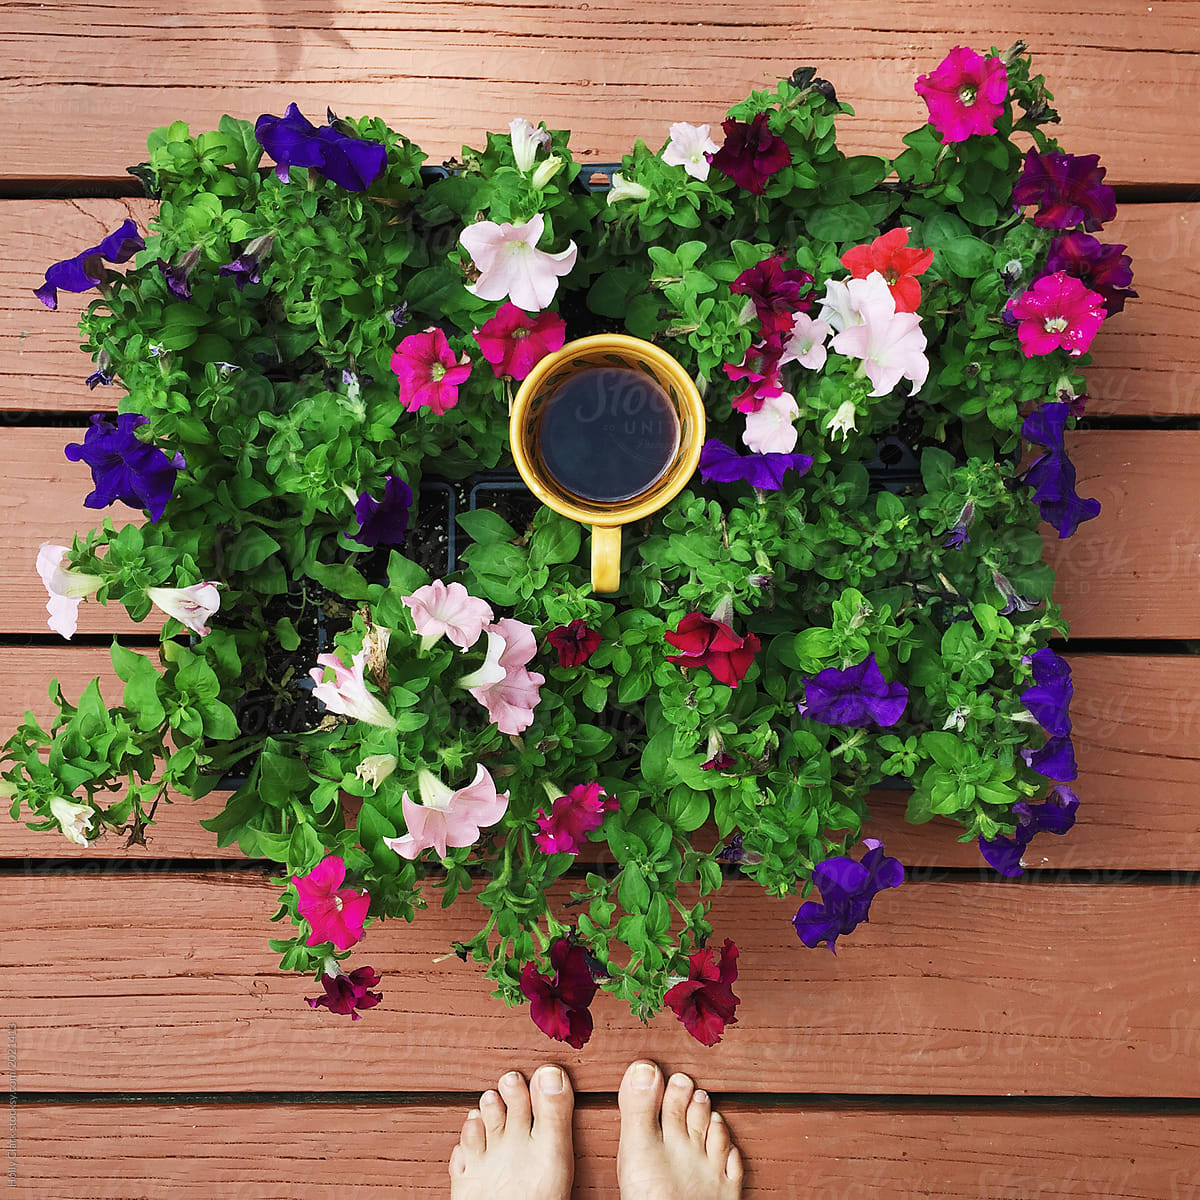 Bare feet next to cup of coffee amidst a group of colorful flowe